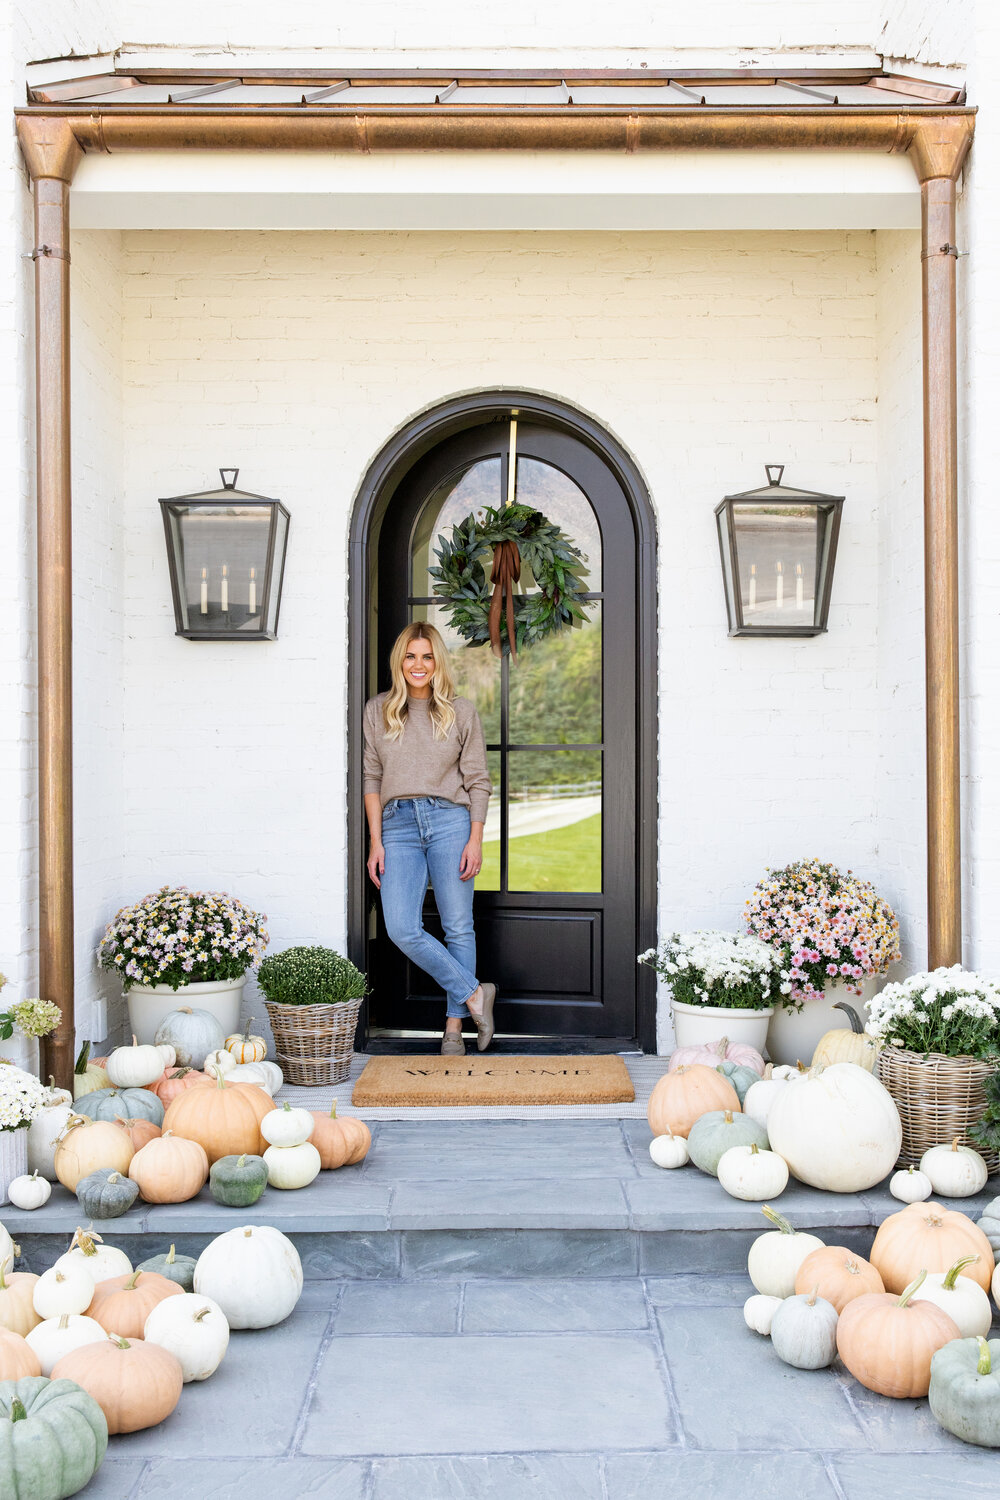 The McGee Home: Our Fall Front Porch Look